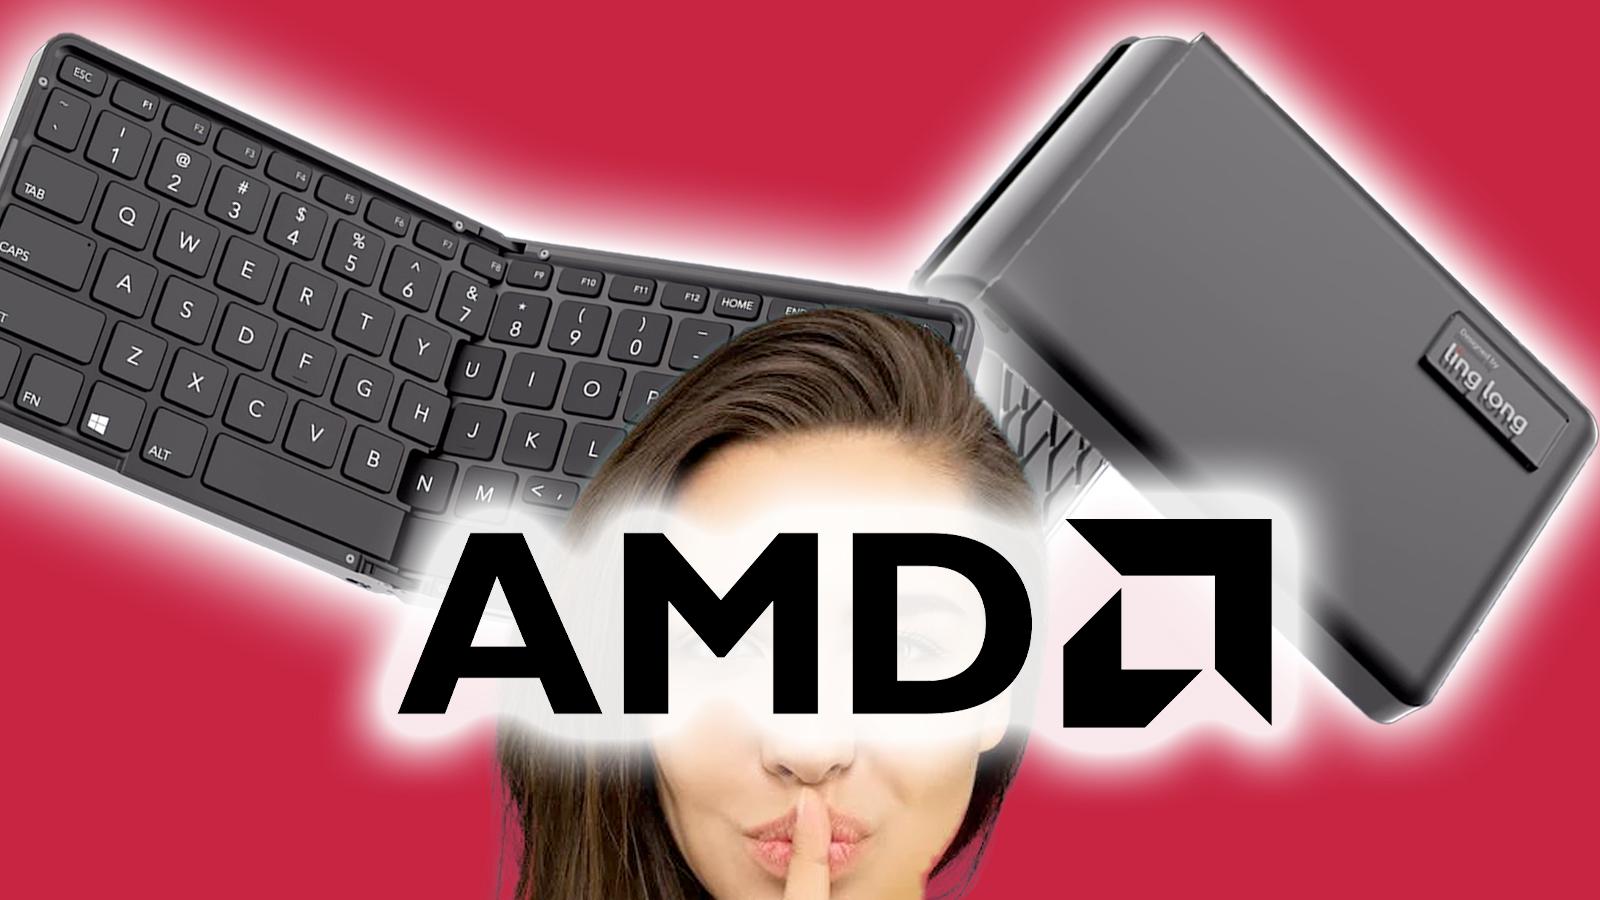 LingLong foldable keyboard mini PC with stock image of a woman holding her fingers to her lips with the AMD logo appended on top